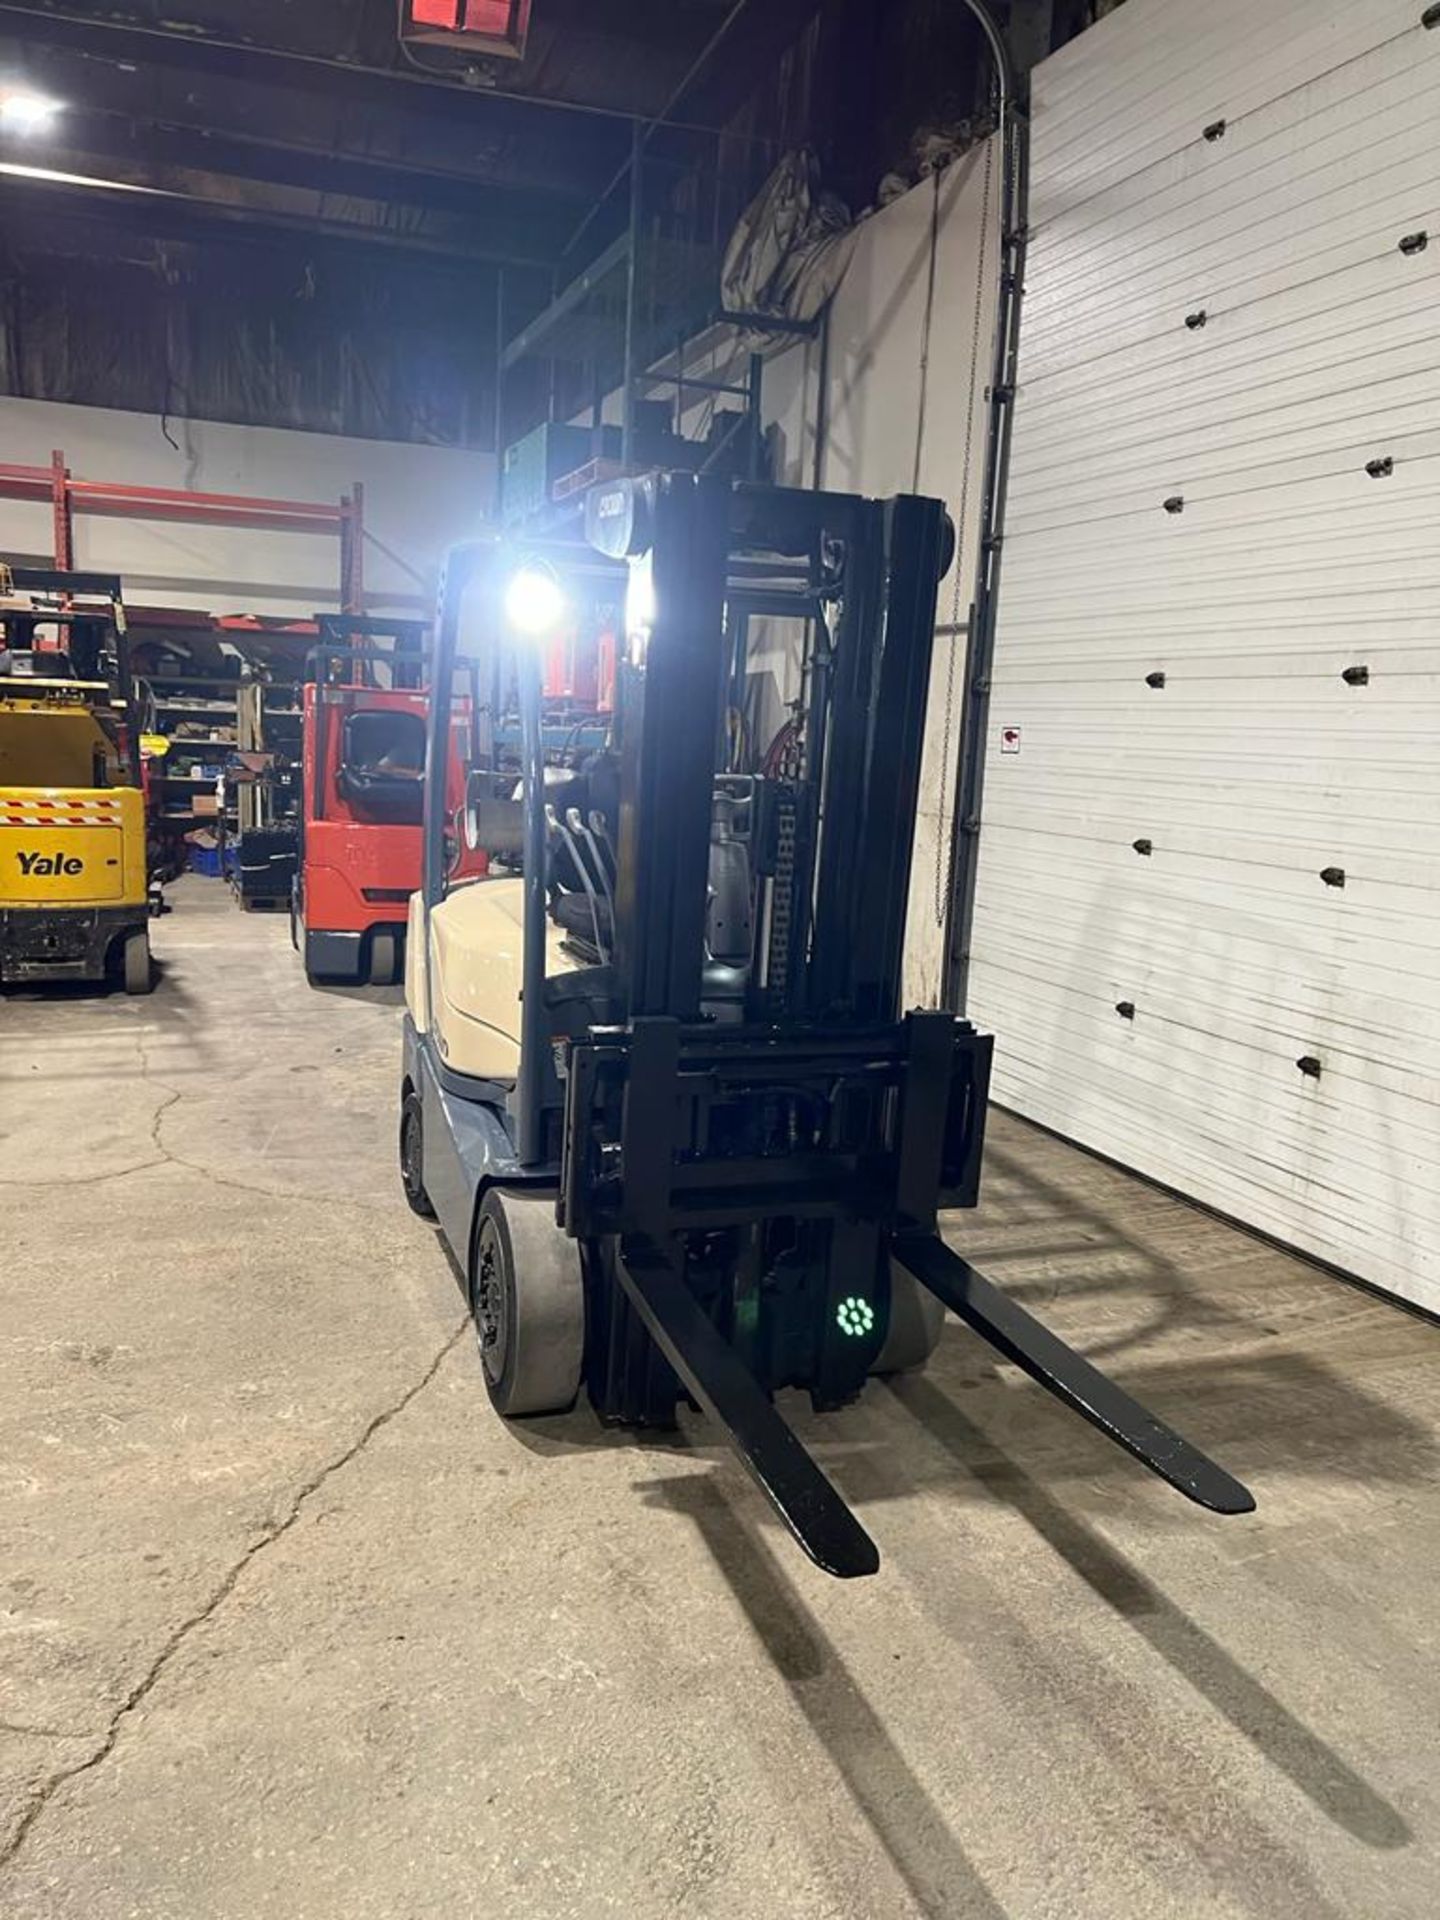 NICE 2016 Crown 5,000lbs Capacity Forklift LPG (propane) with Sideshift & 3-stage Mast (no propane - Image 3 of 3